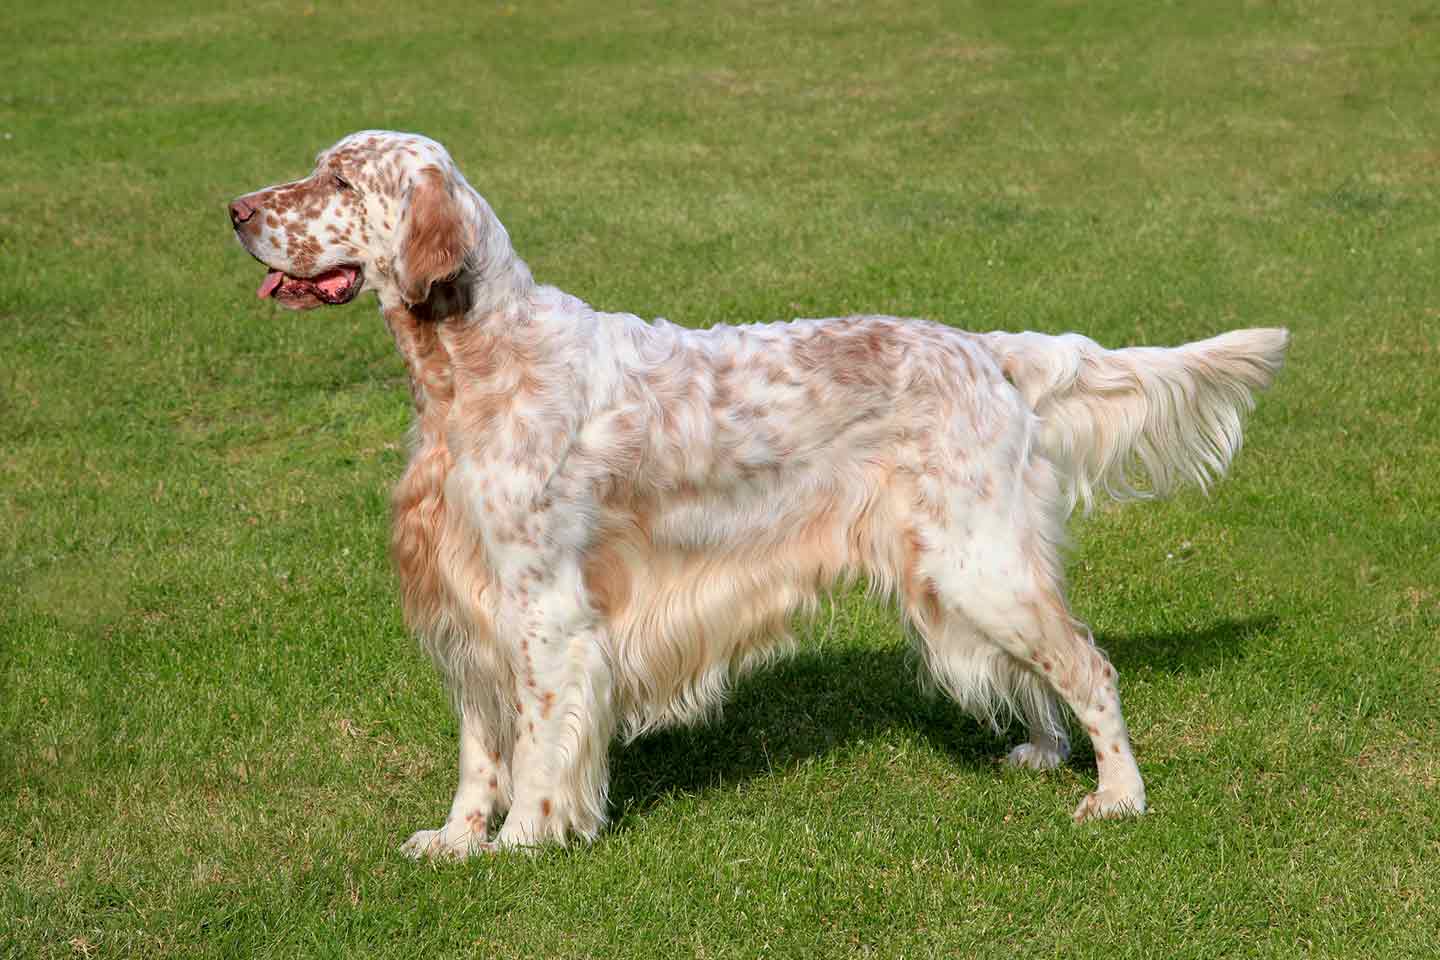 Photo of an English Setter dog standing in grass